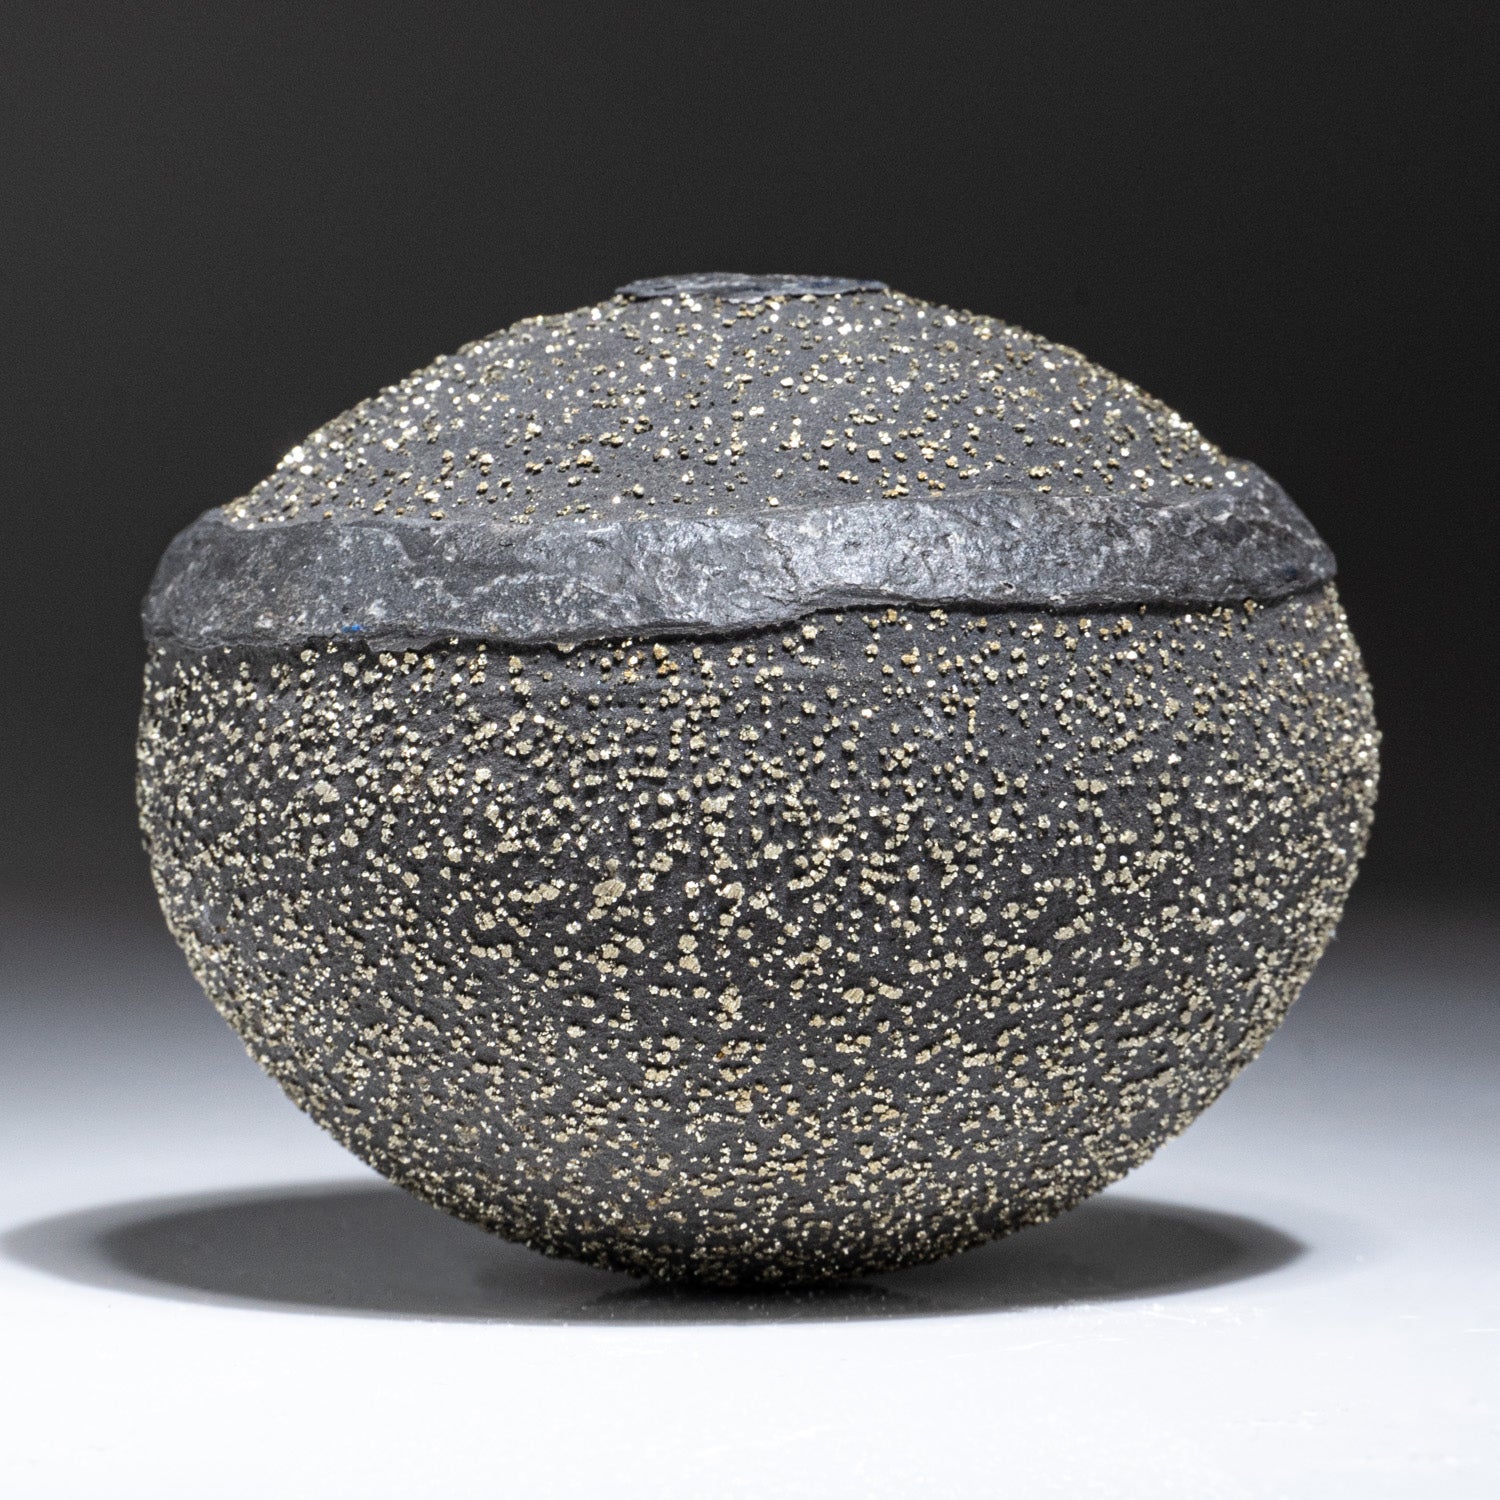 Pyrite Concretion (Boji Stone) From Dongchuan District, Kunming Prefecture, Yunnan Province, China (1.85 lbs)